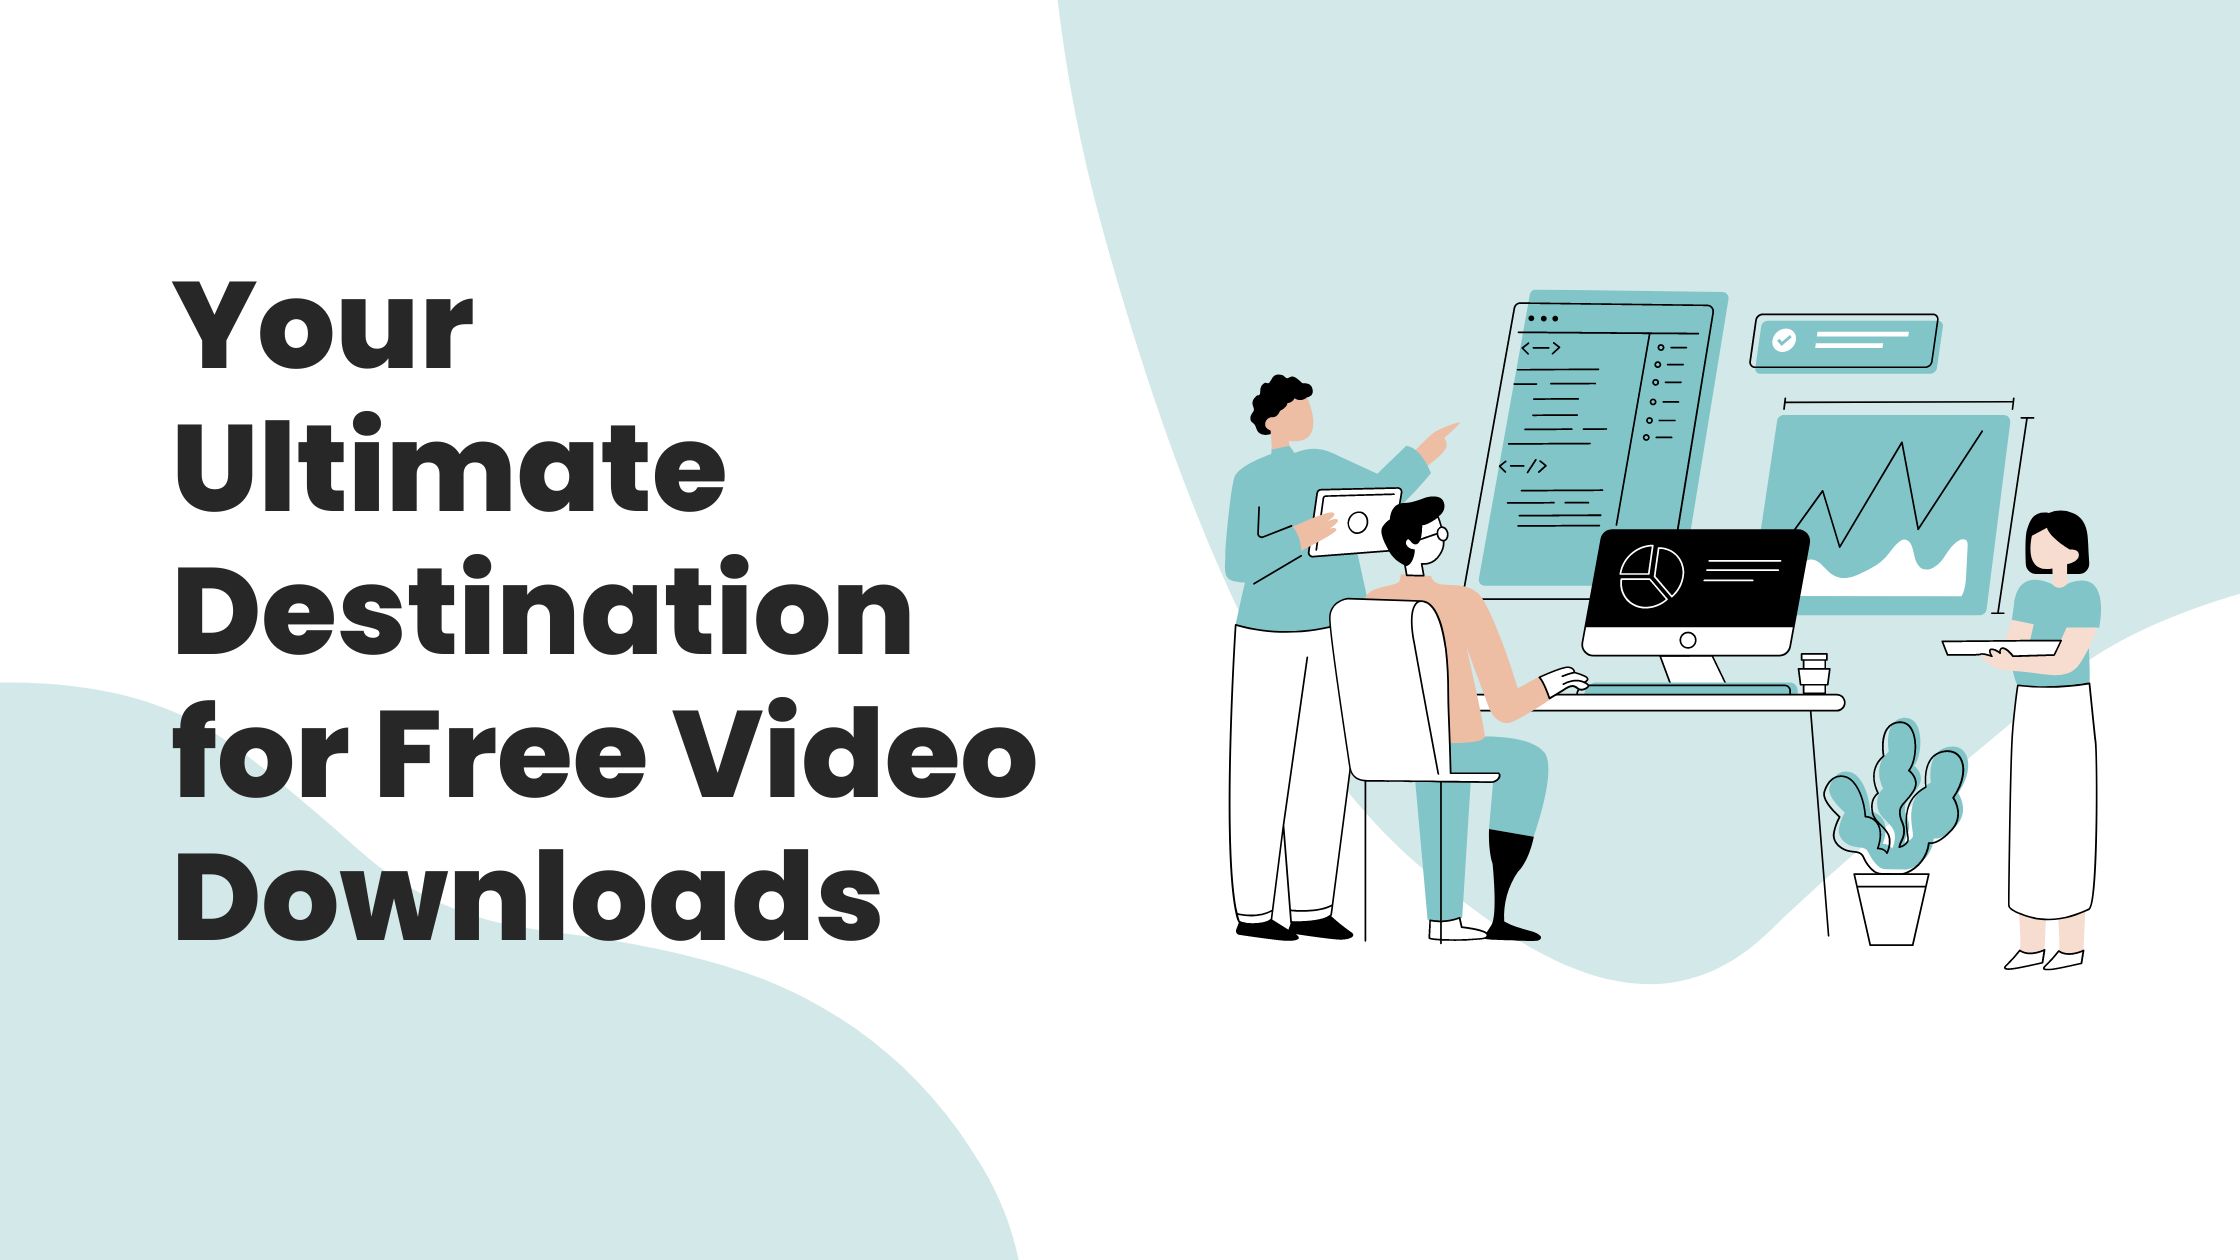 Your Ultimate Destination for Free Video Downloads